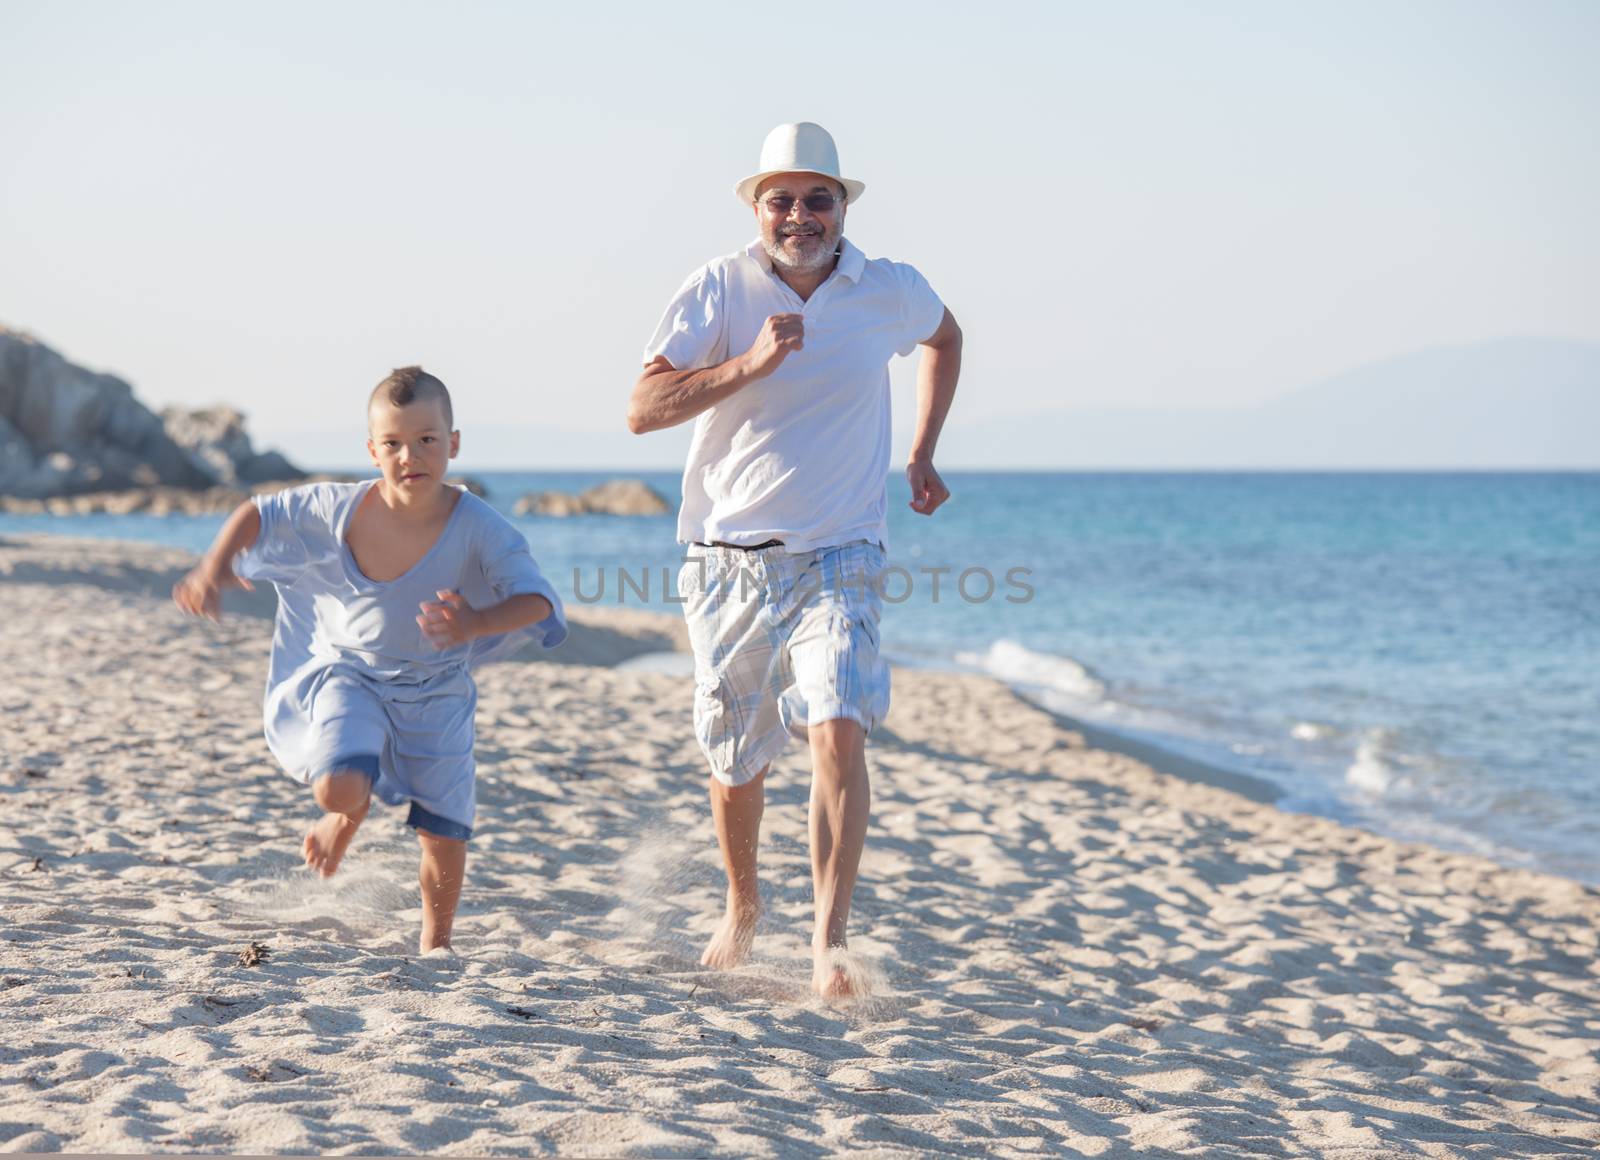 Competition Beach Sea Grandfather Generations Grandson Running by vilevi